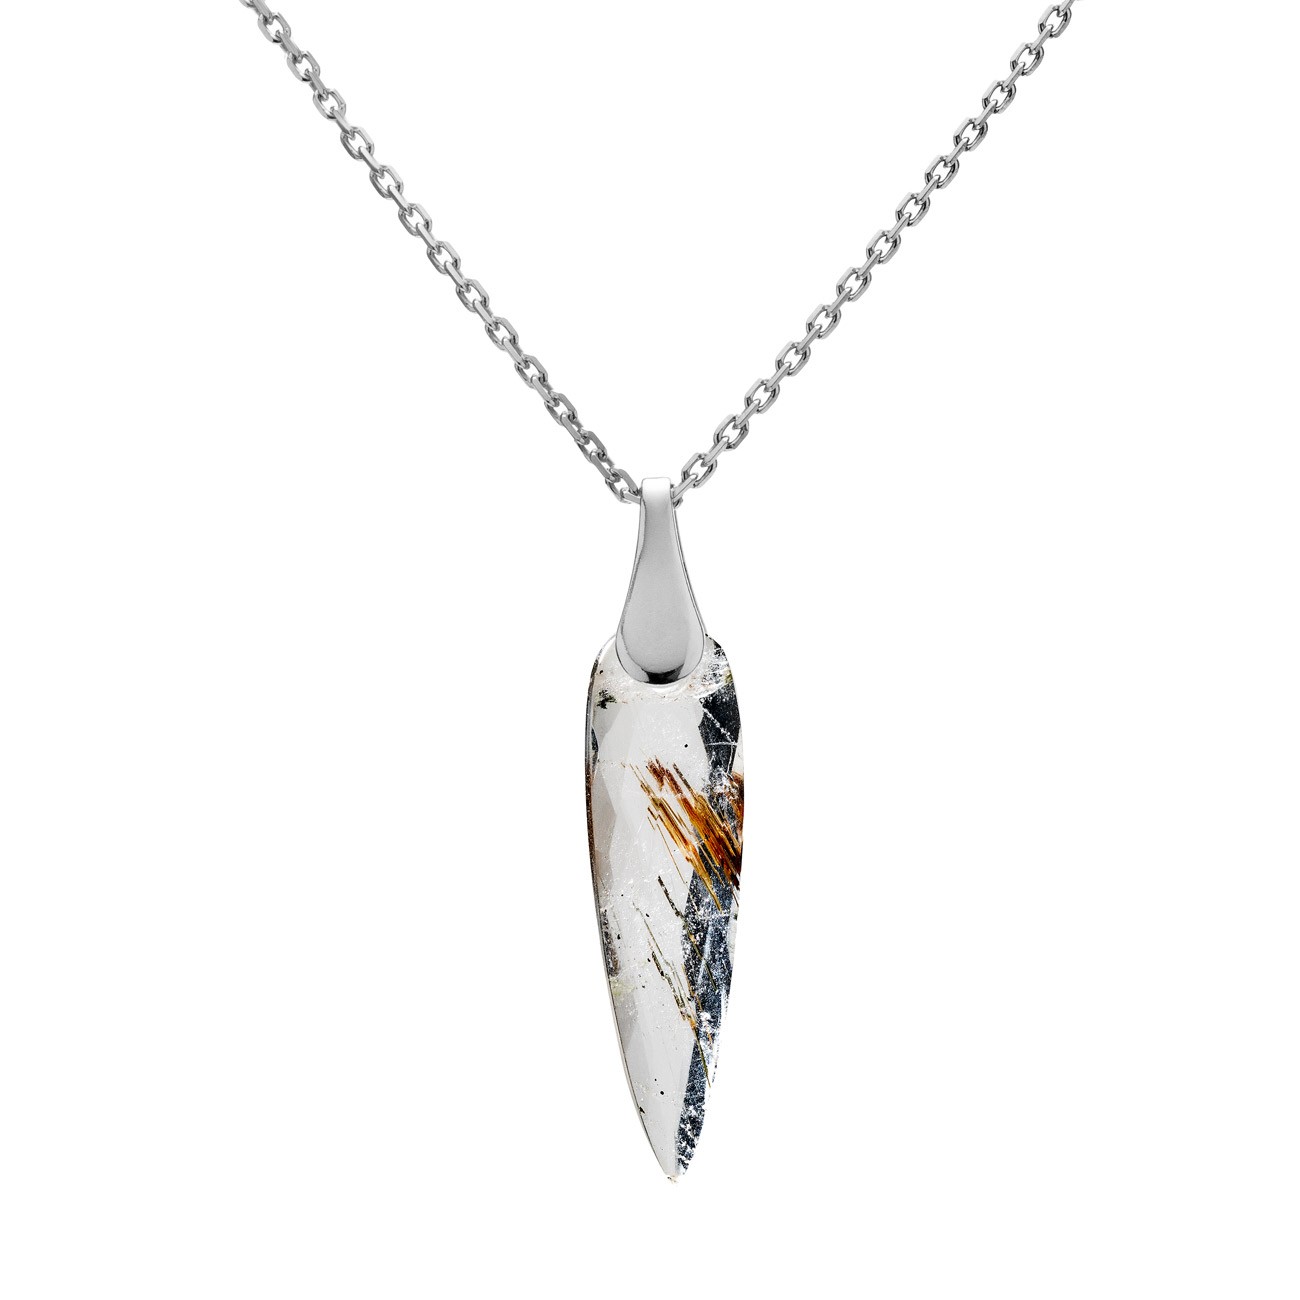 Necklace with natural stone Gavbari - Rose Cut, sterling silver 925